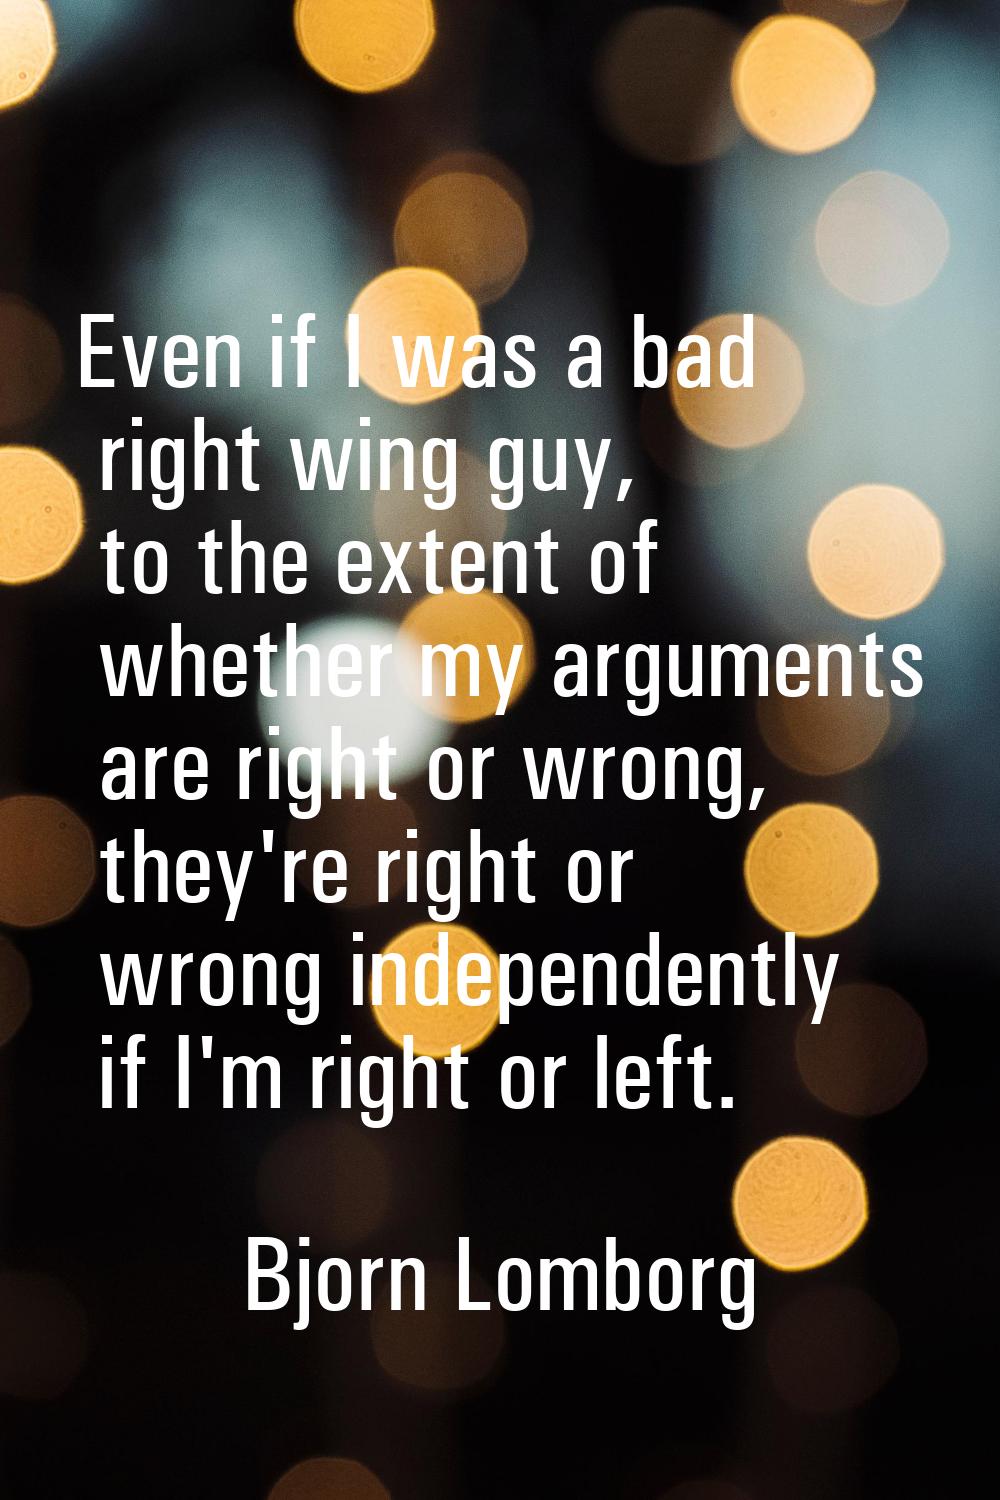 Even if I was a bad right wing guy, to the extent of whether my arguments are right or wrong, they'